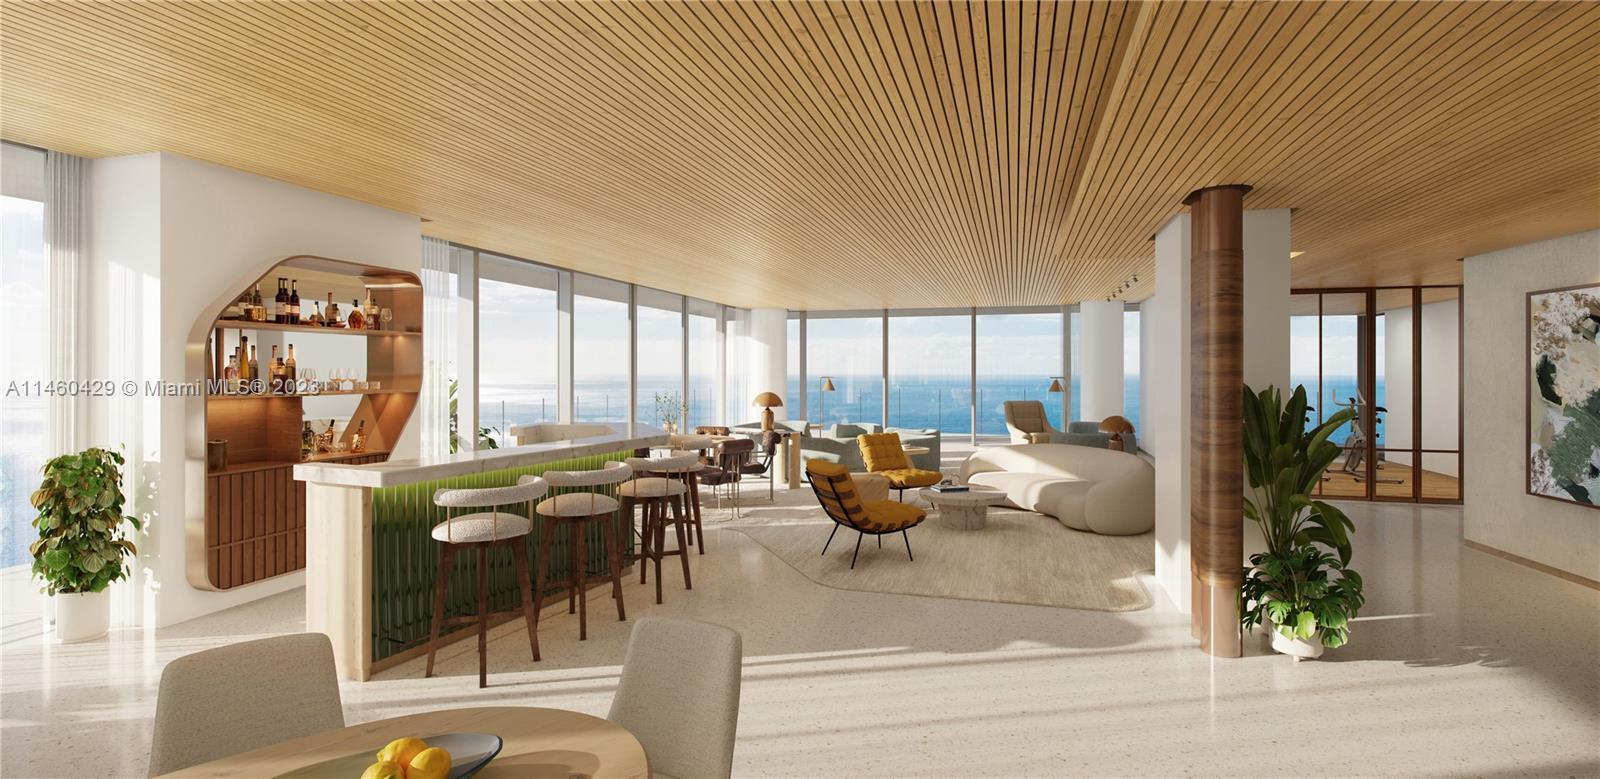 Rare opportunity in Bal Harbour’s most coveted building to customize a one-of-a-kind direct oceanfro